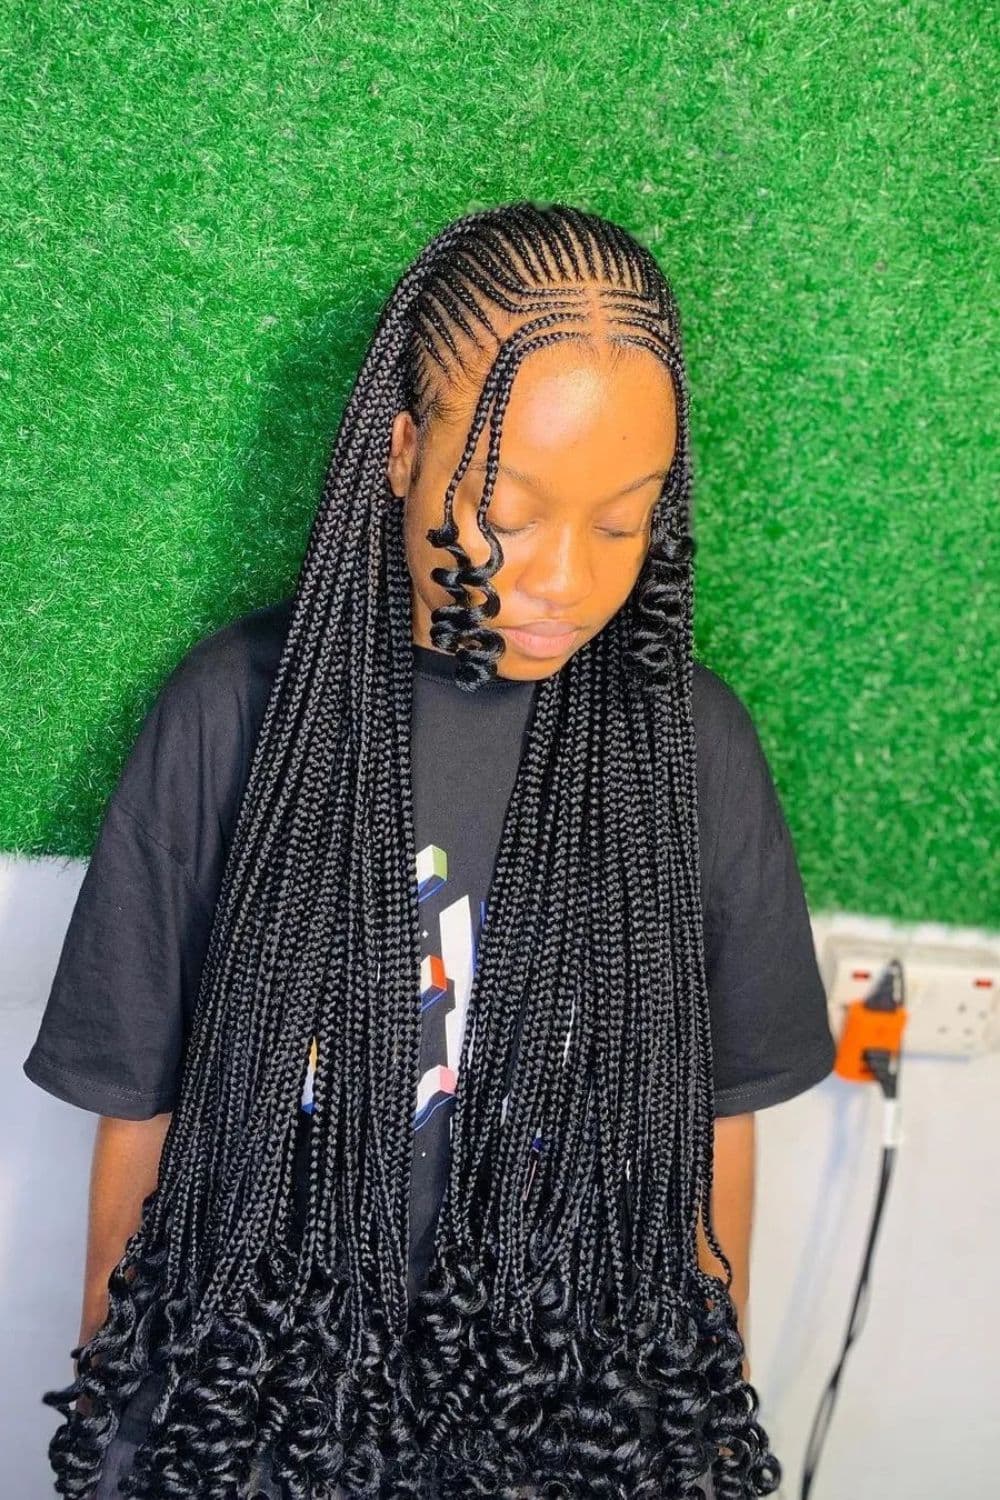 A woman wearing a black t-shirt with middle part tribal braids with curly ends.